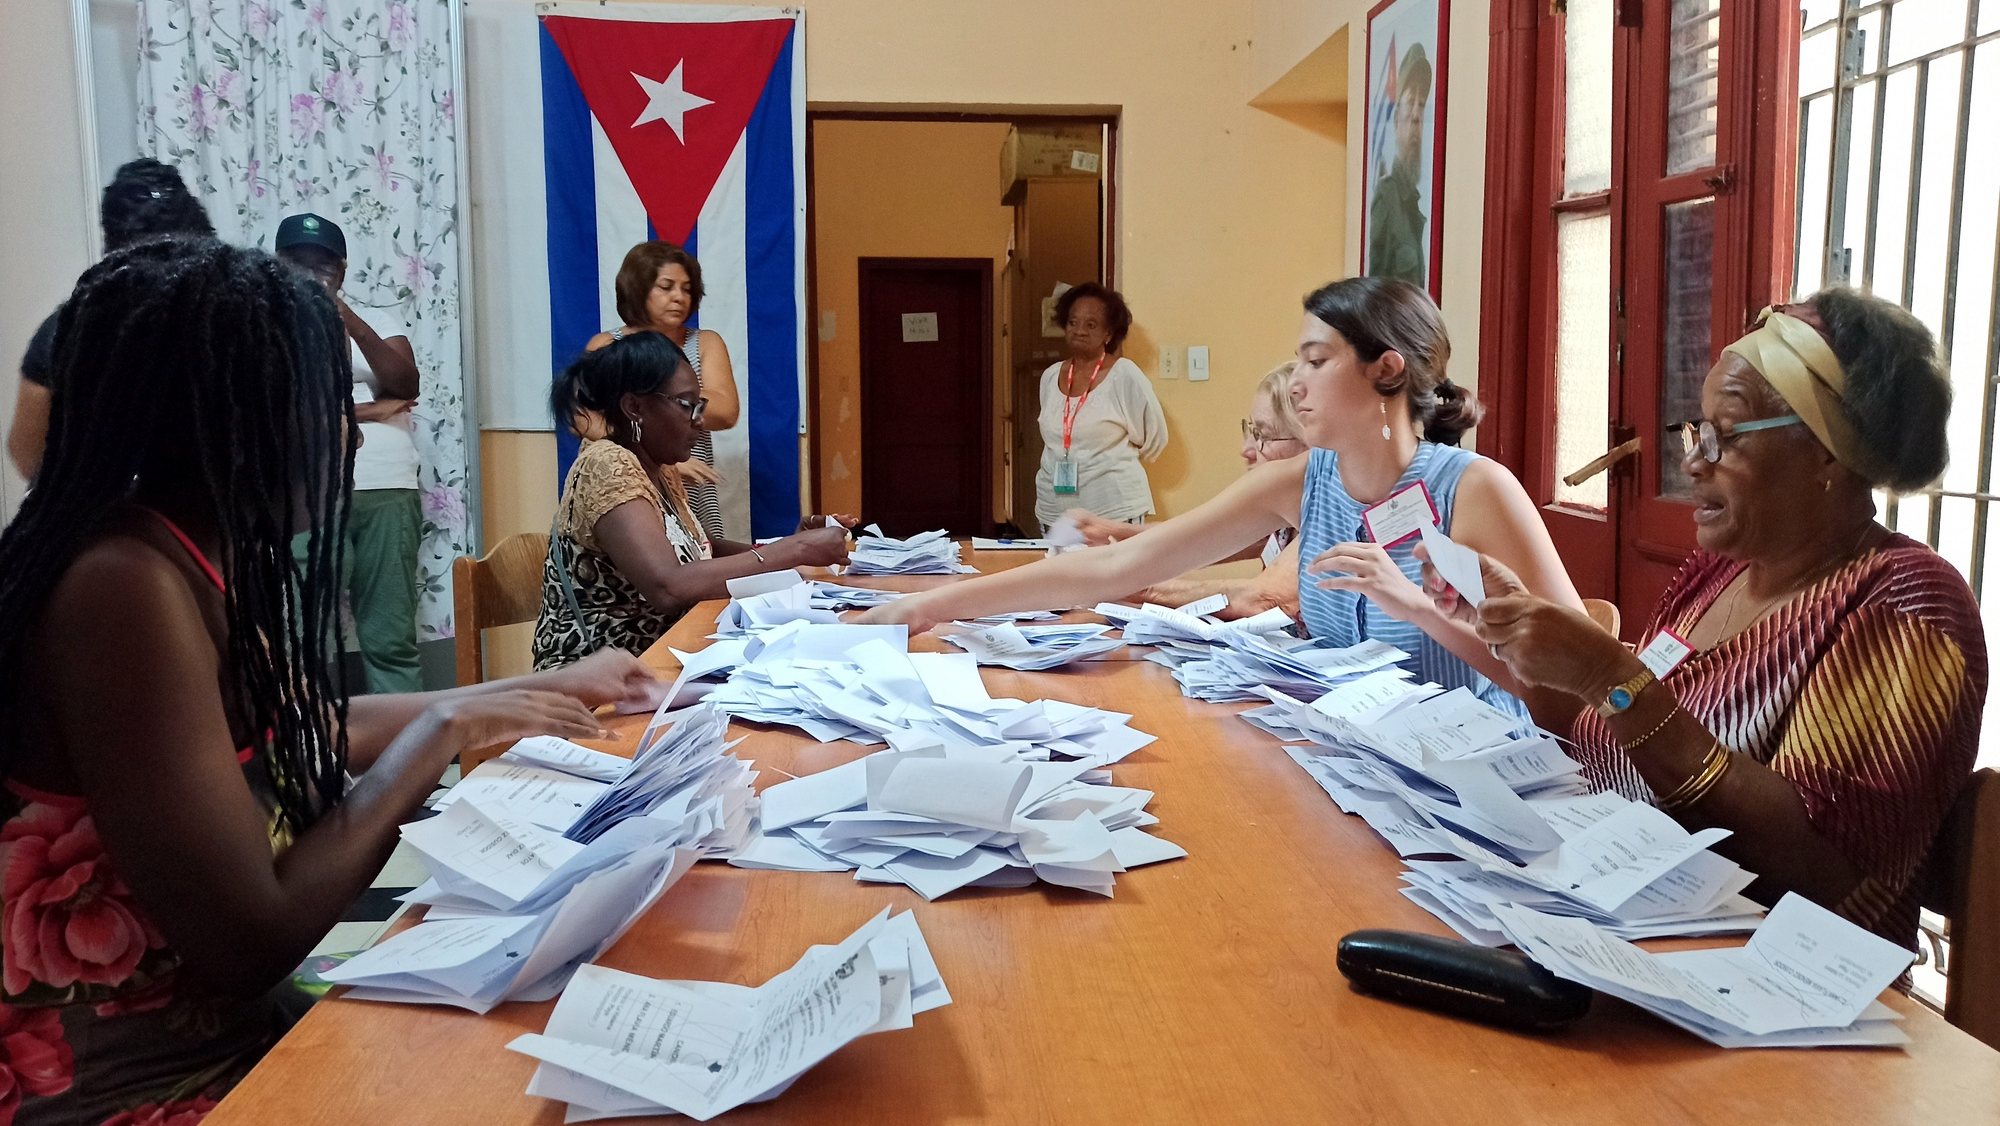 epa10544798 Poll workers carry out the vote count at a polling station at the close of electoral day in Havana, Cuba, 26 March 2023. Polling stations in Cuba closed their doors at 7:00 p.m. local time and the electoral authorities began the public count of the votes cast for the Cuban parliament.  EPA/Ernesto Mastrascusa